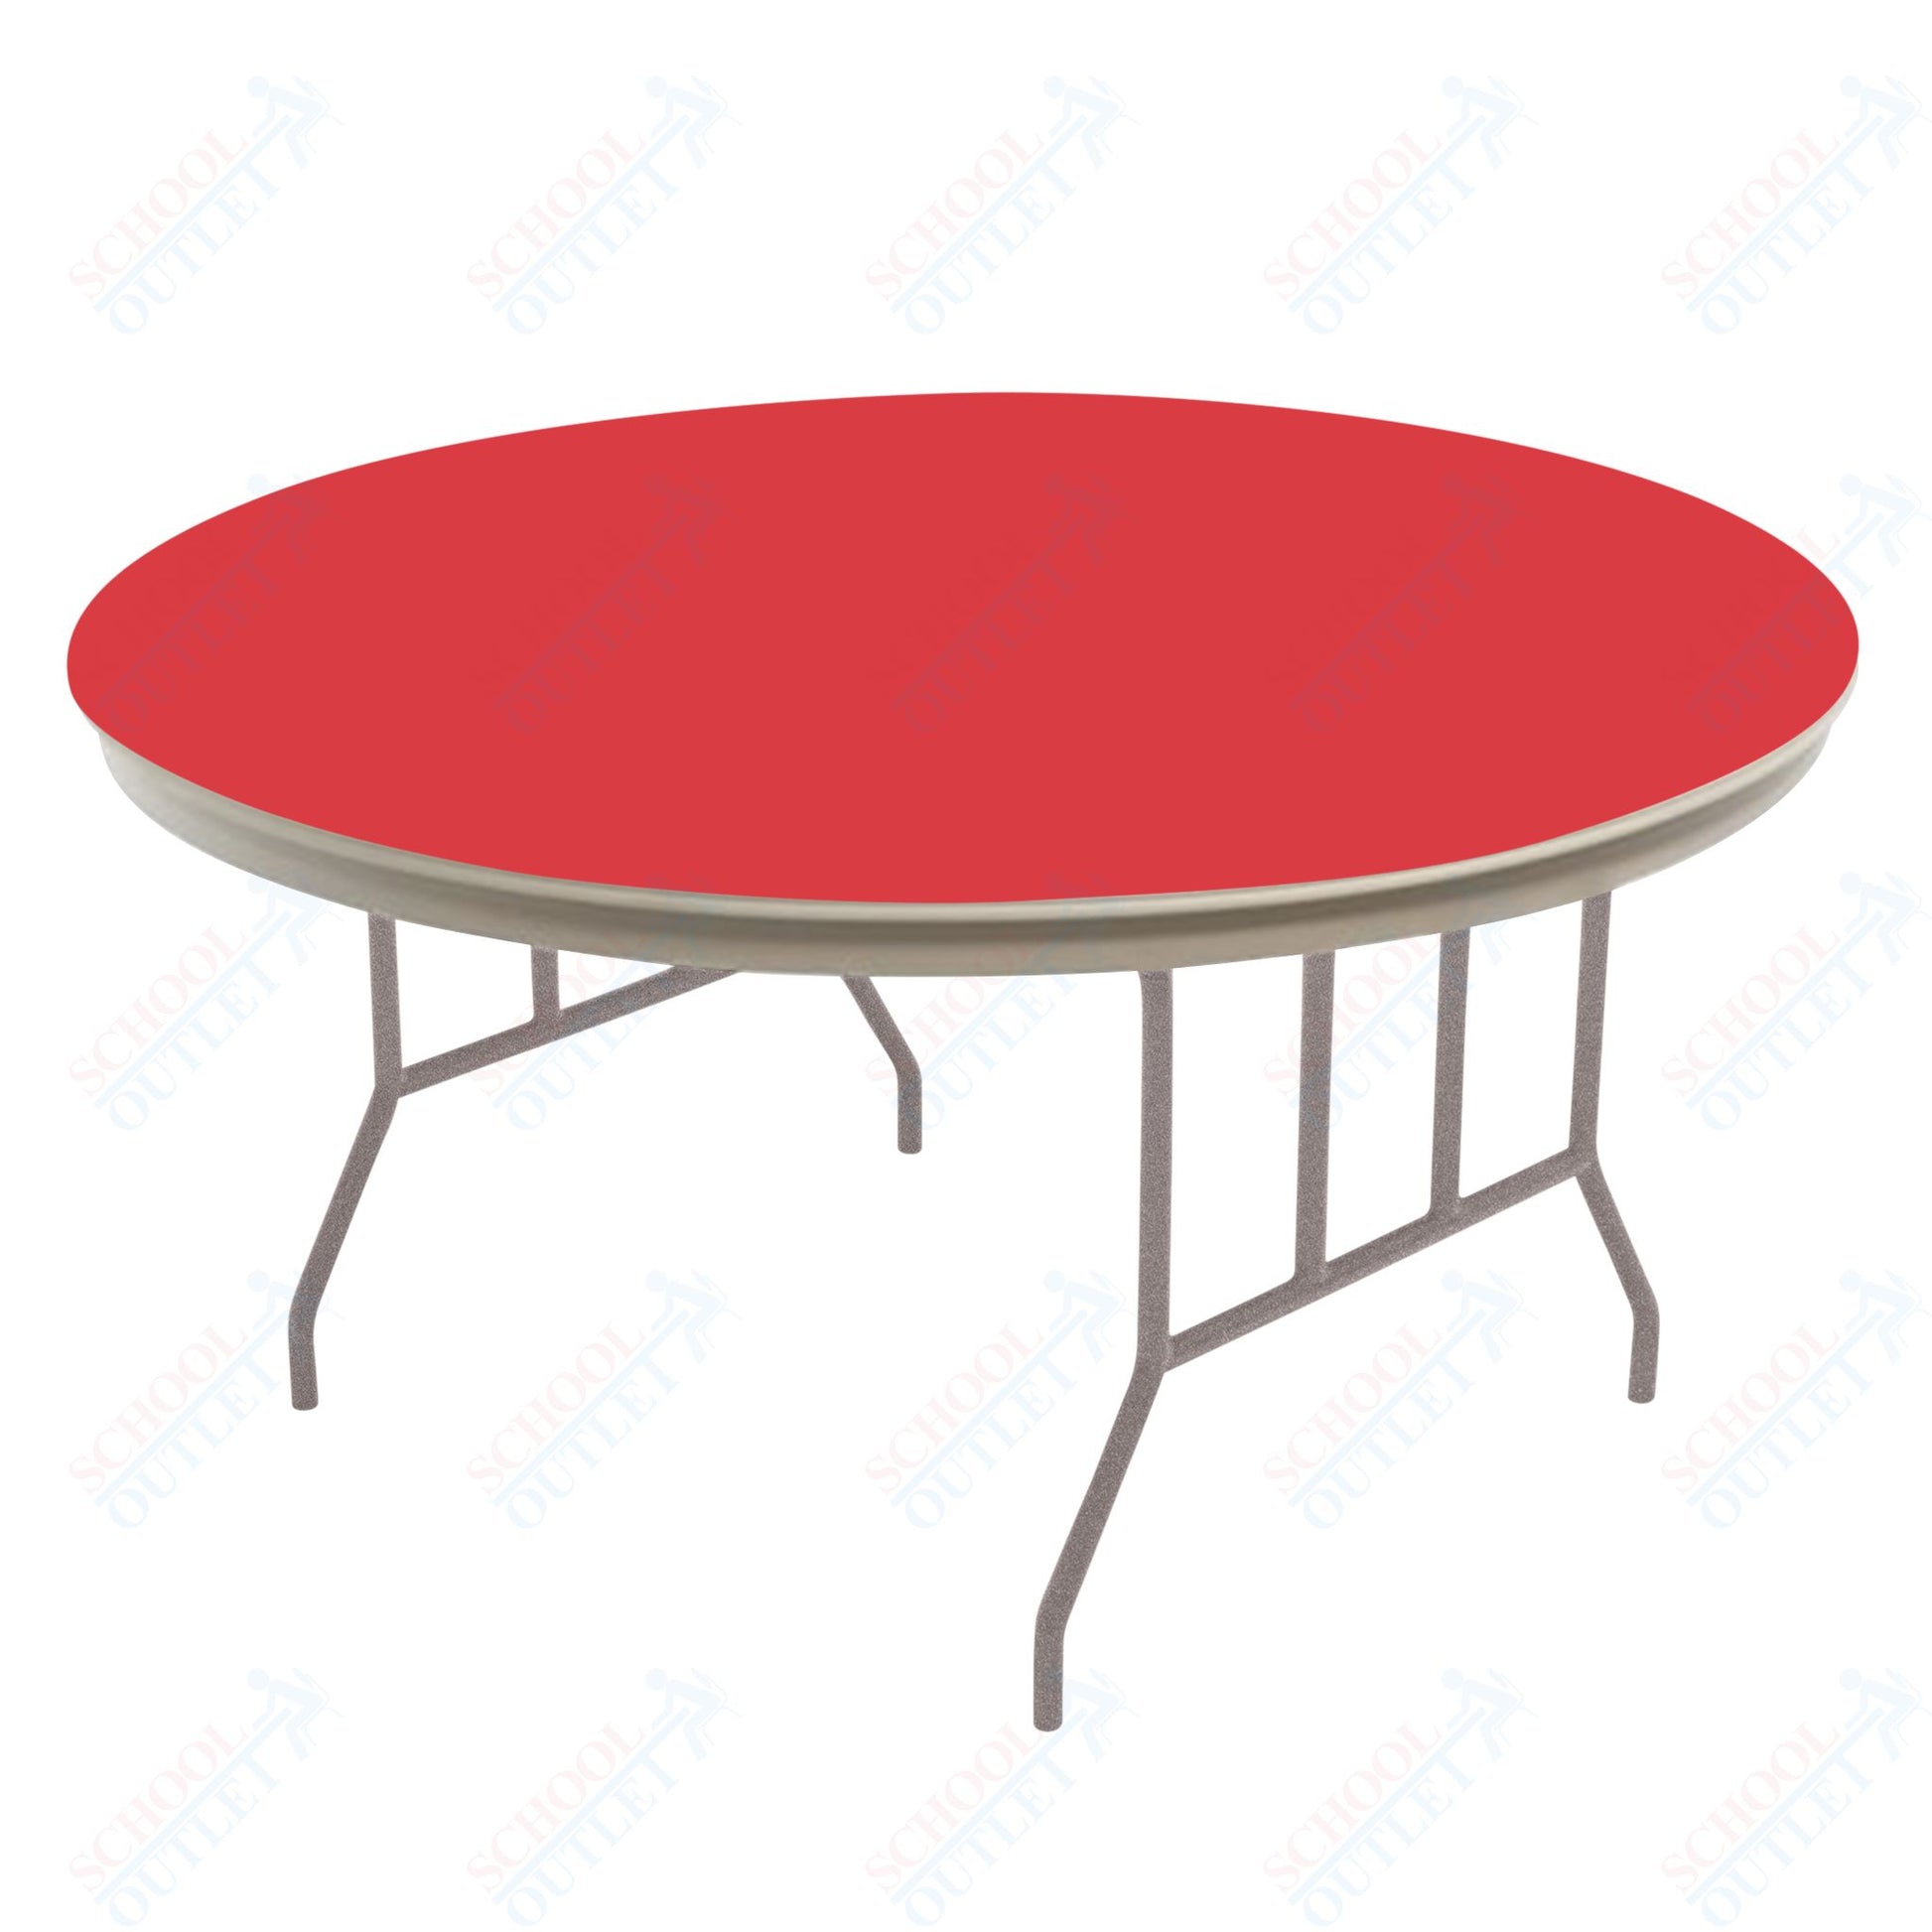 AmTab Dynalite Featherweight Heavy - Duty ABS Plastic Folding Table - Round - 66" Diameter x 29"H (AmTab AMT - R66DL) - SchoolOutlet